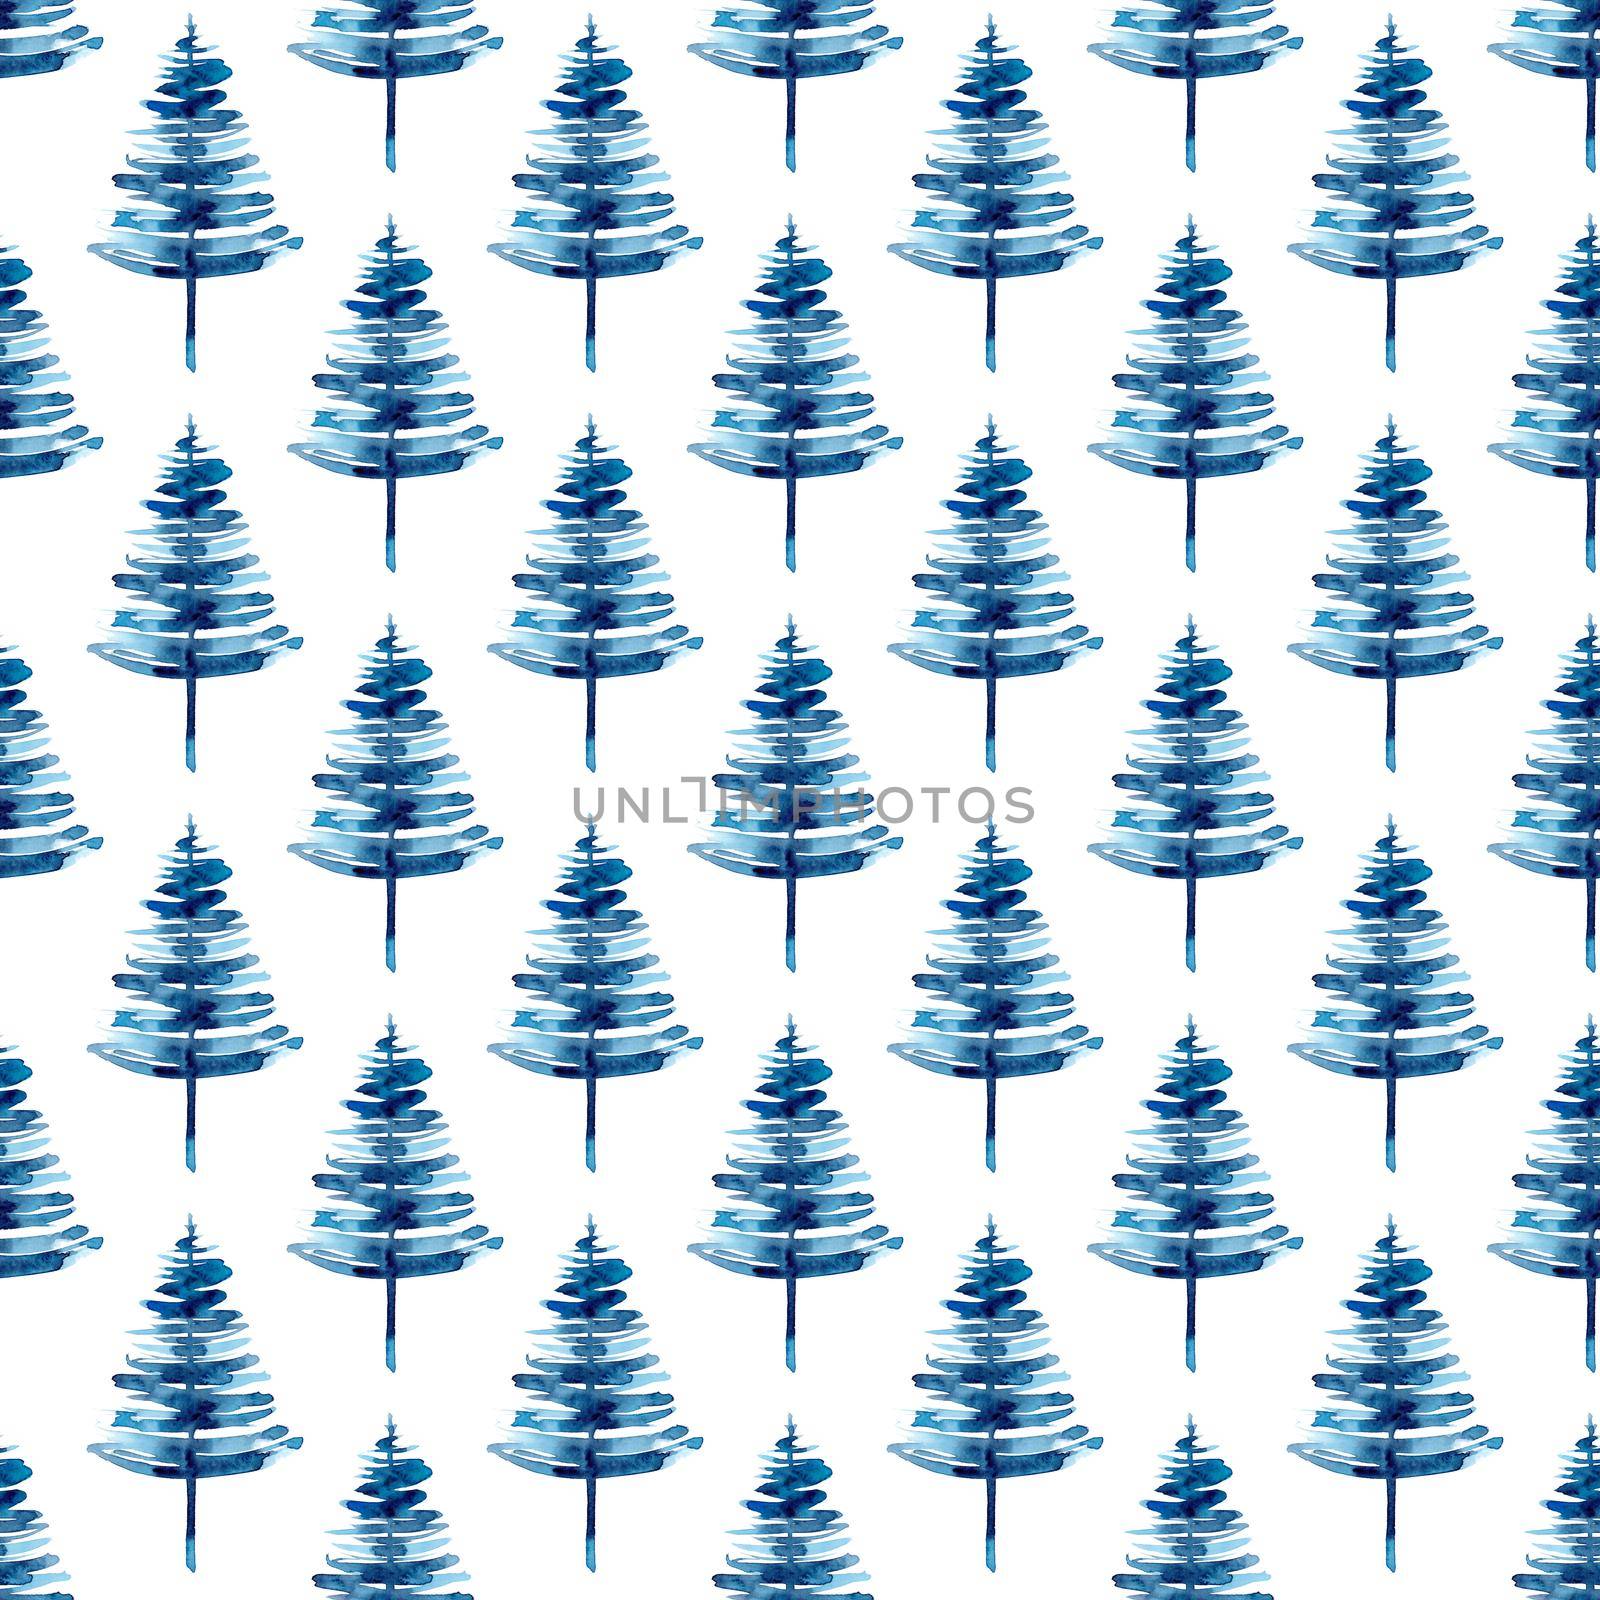 XMAS watercolor Pine Tree Seamless Pattern in Blue Color. Hand Painted fir tree background or wallpaper for Ornament, Wrapping or Christmas Gift by DesignAB